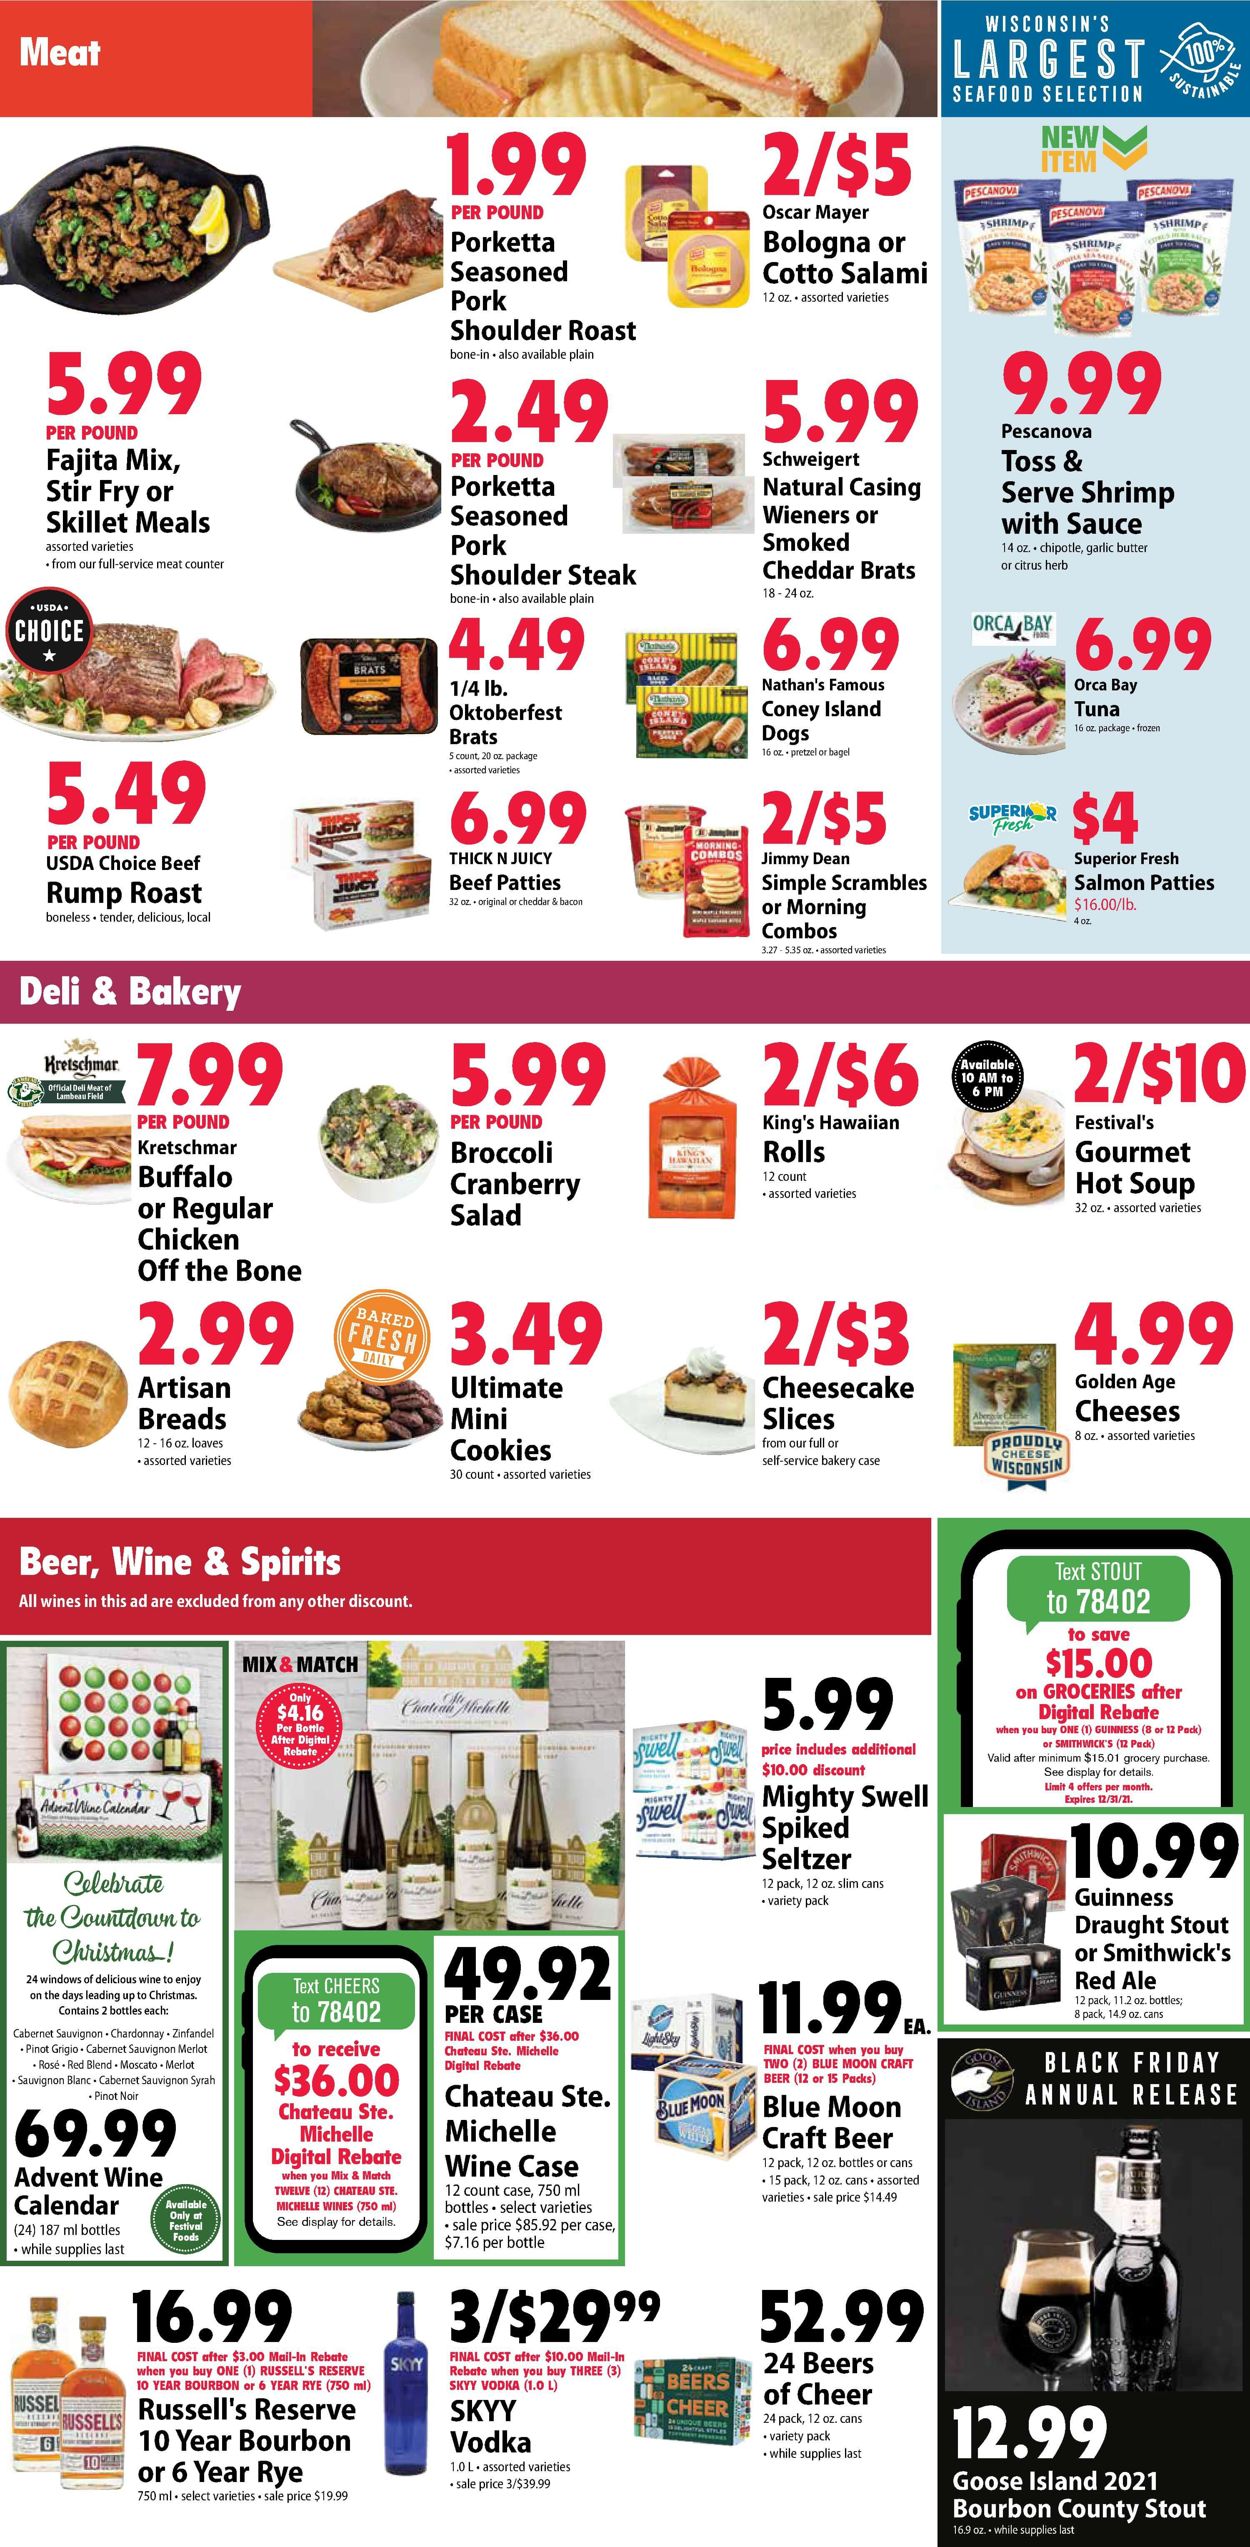 Festival Foods HOLIDAY 2021 Weekly Ad Circular - valid 11/24-11/30/2021 (Page 2)